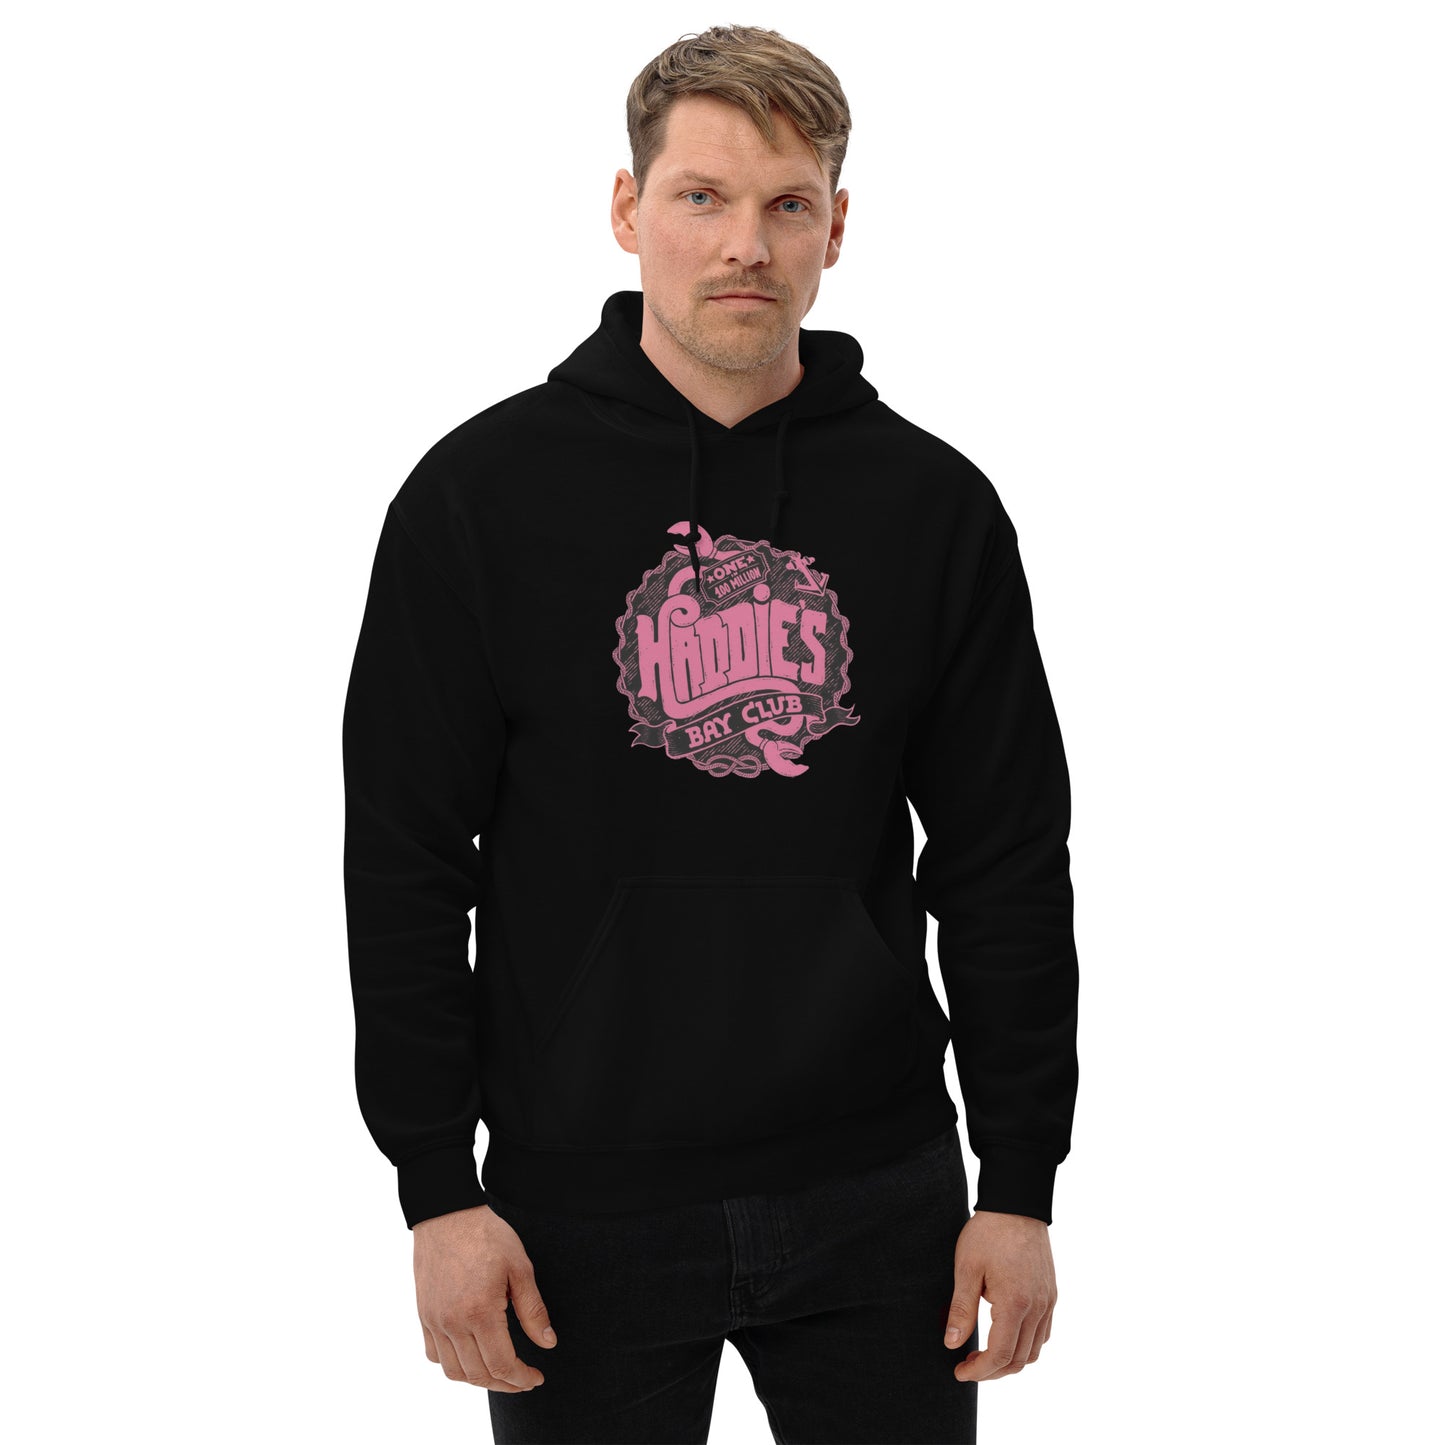 Haddies Classic Hoodie (Cotton Candy Pink)